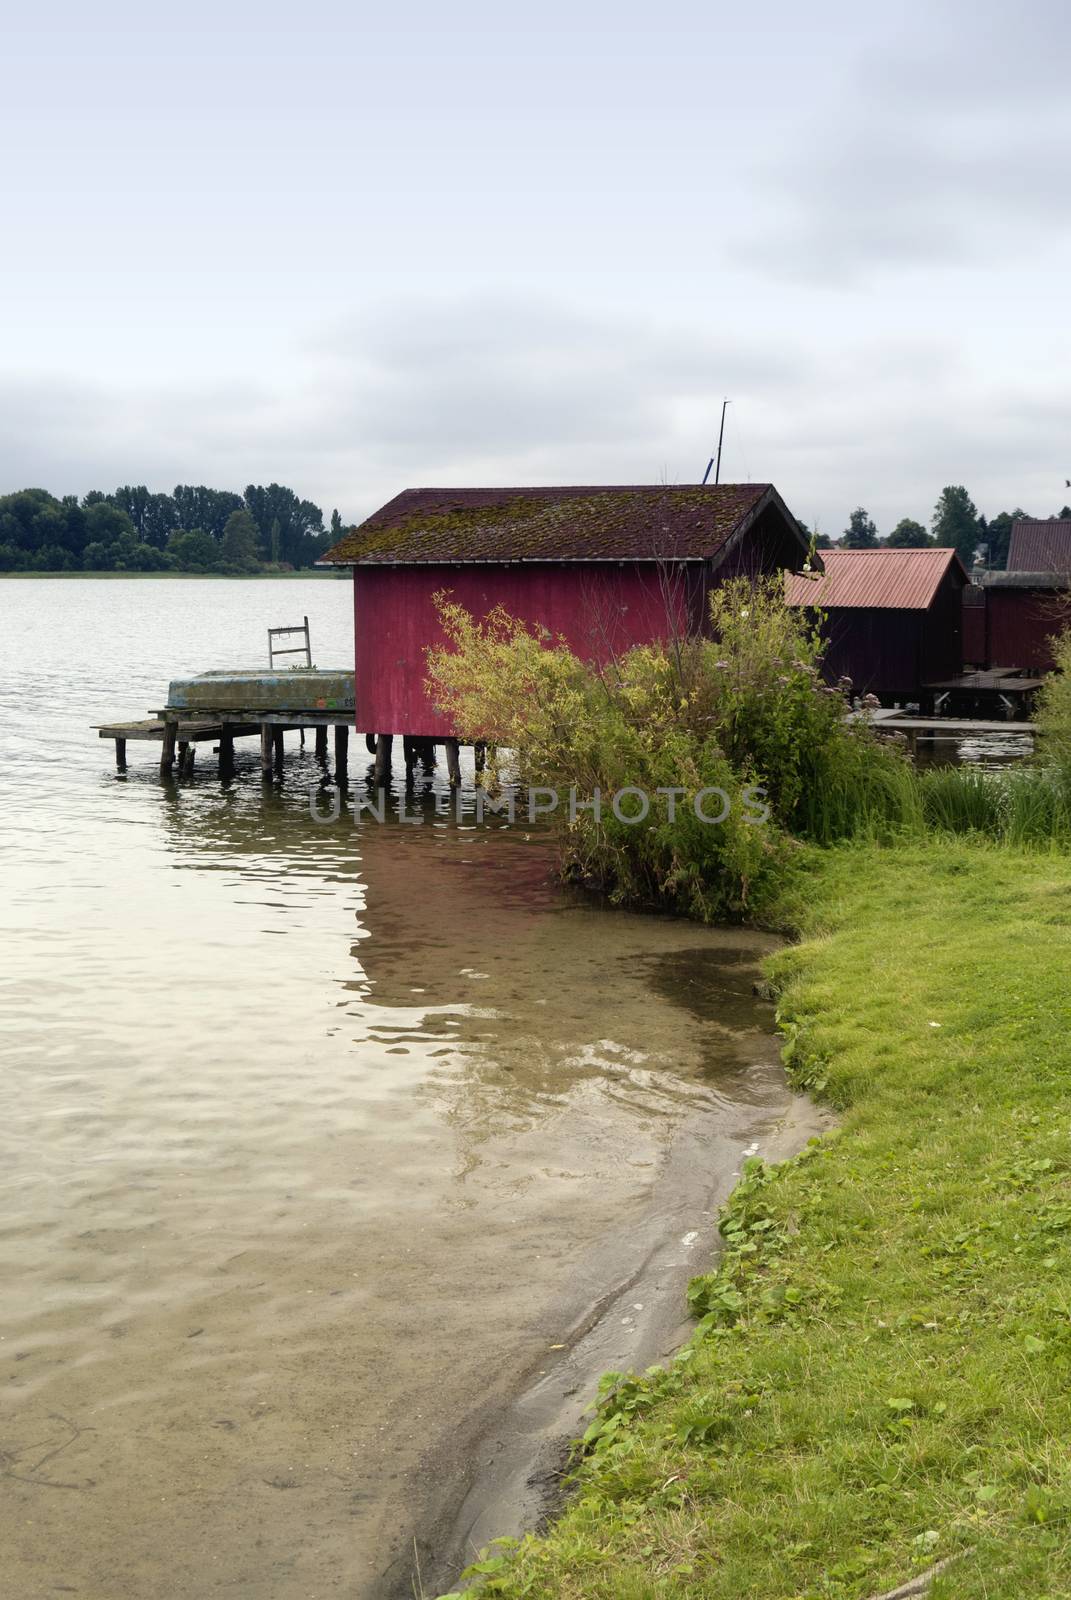 Boathouse at the Schaalsee in Germany